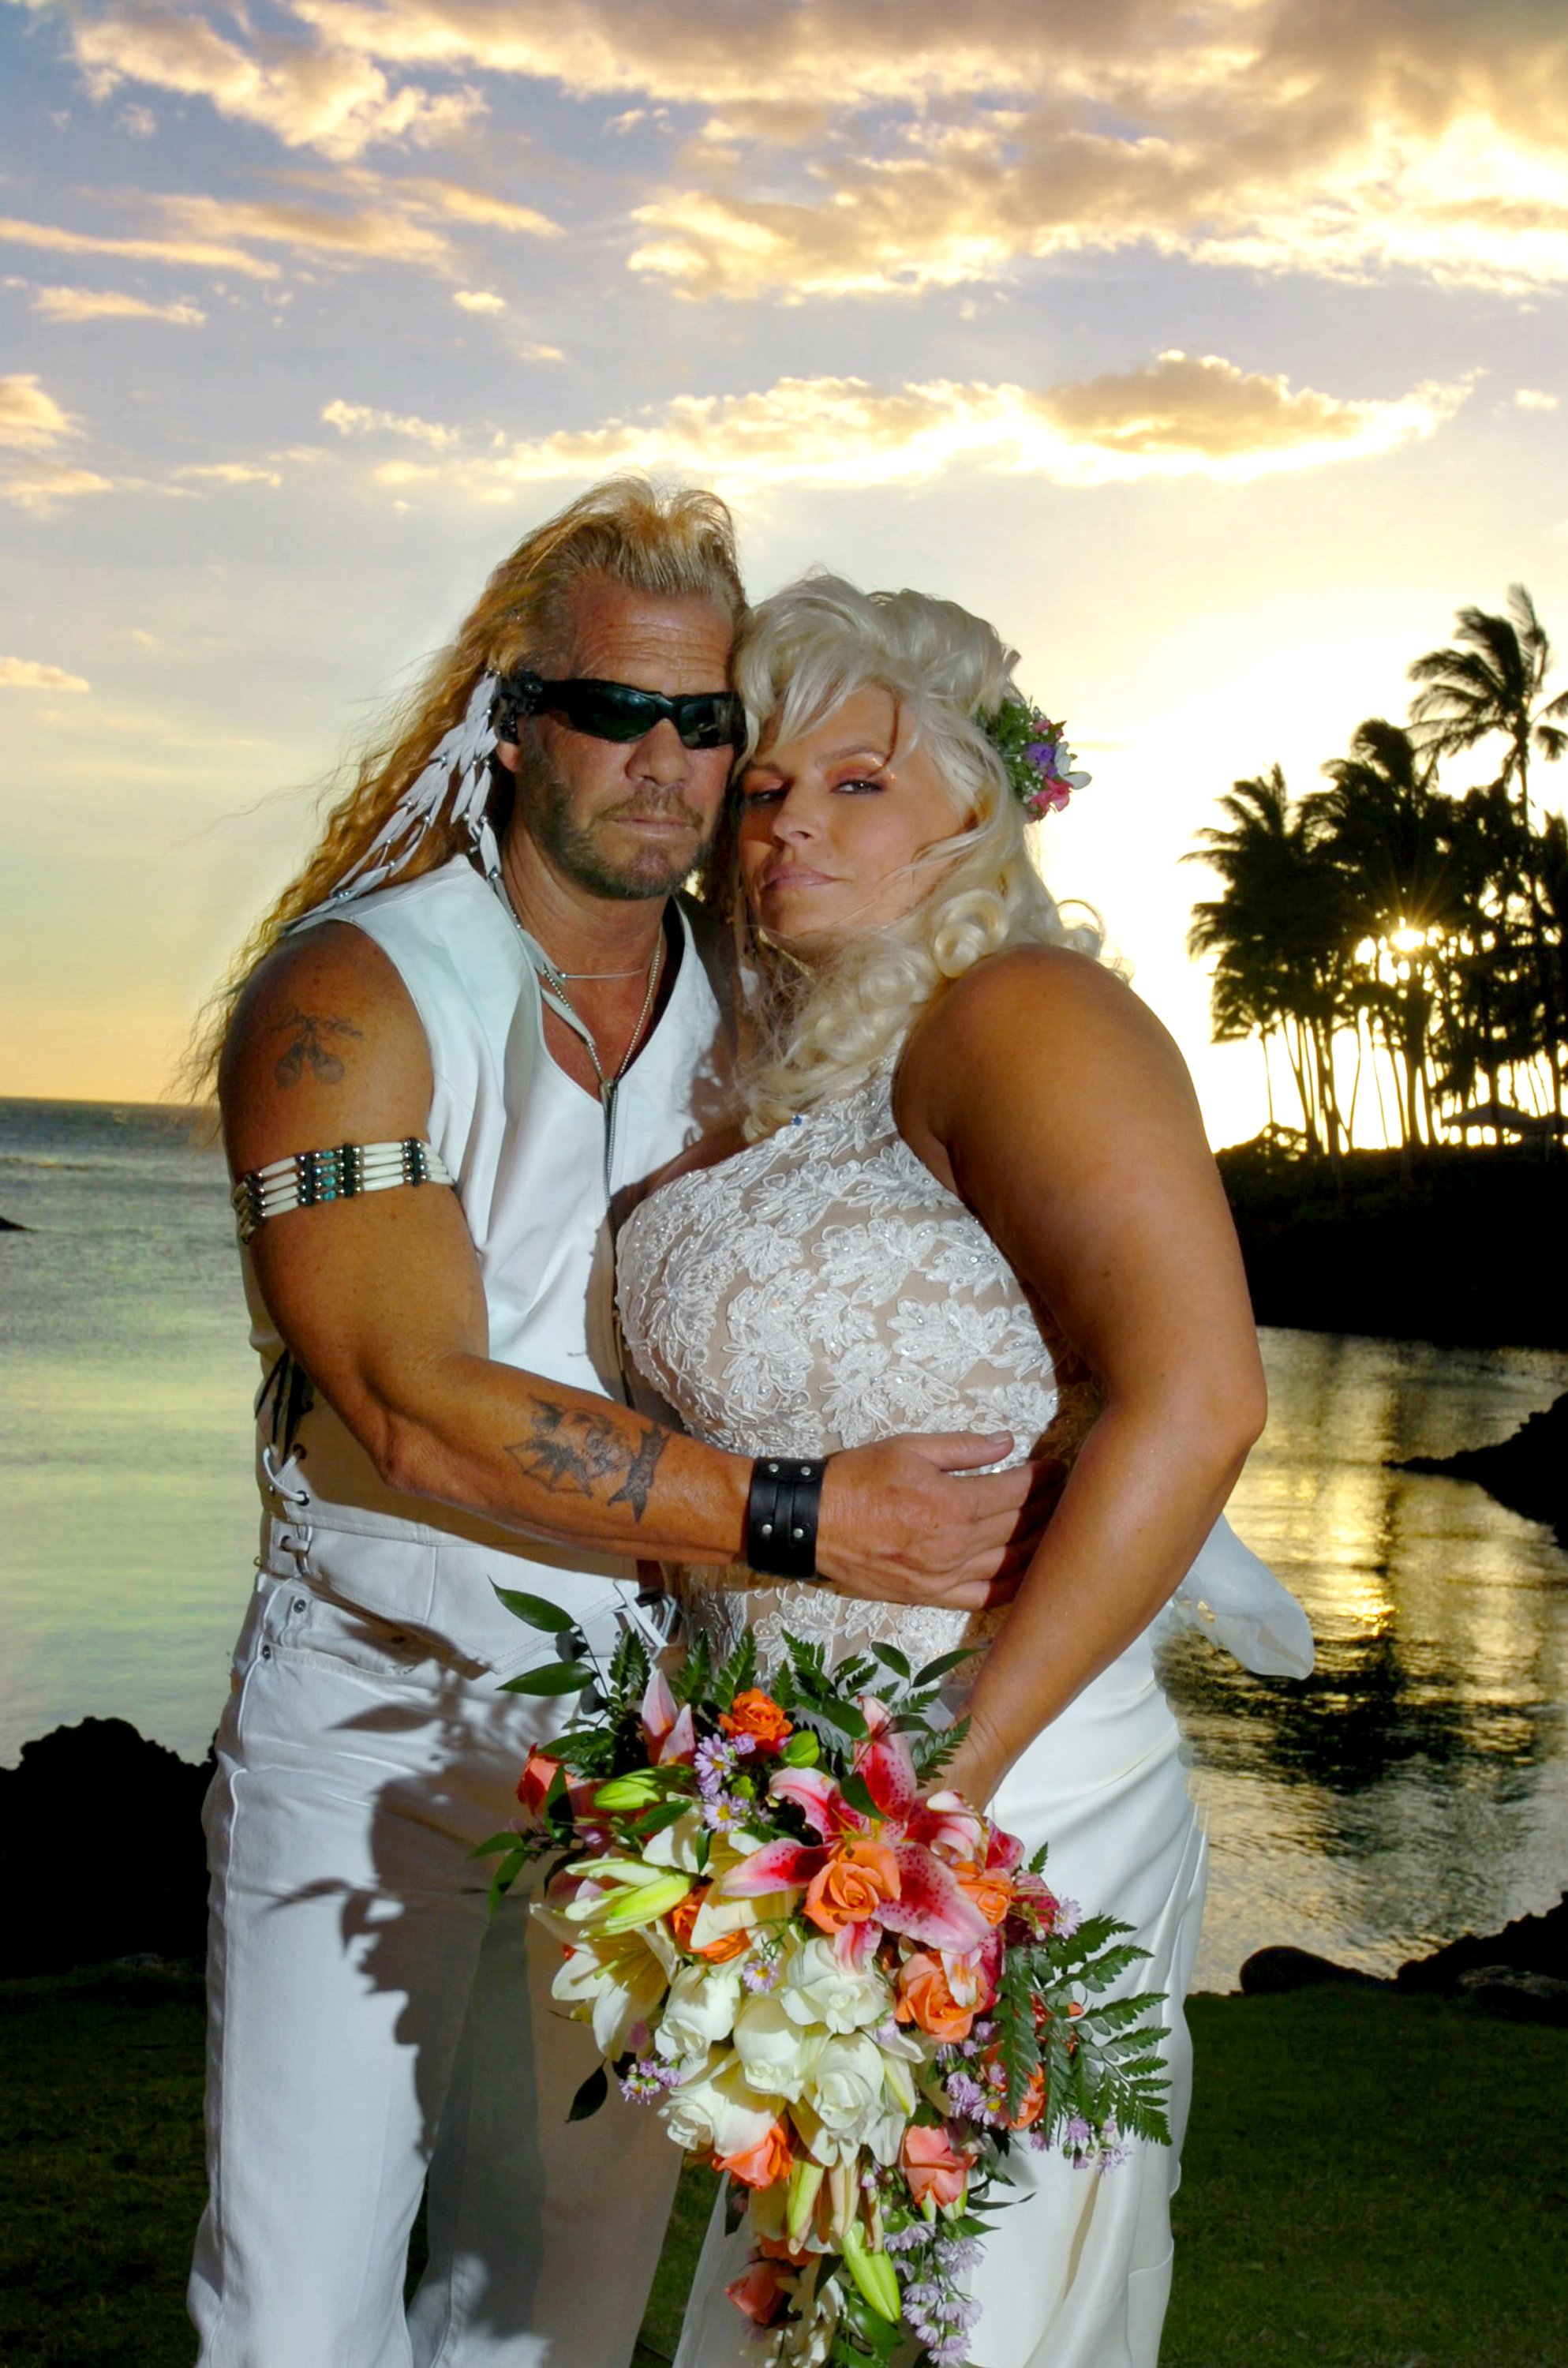 Dog and Beth at their wedding in 2006, in Hawaii. | Photo: Getty Images